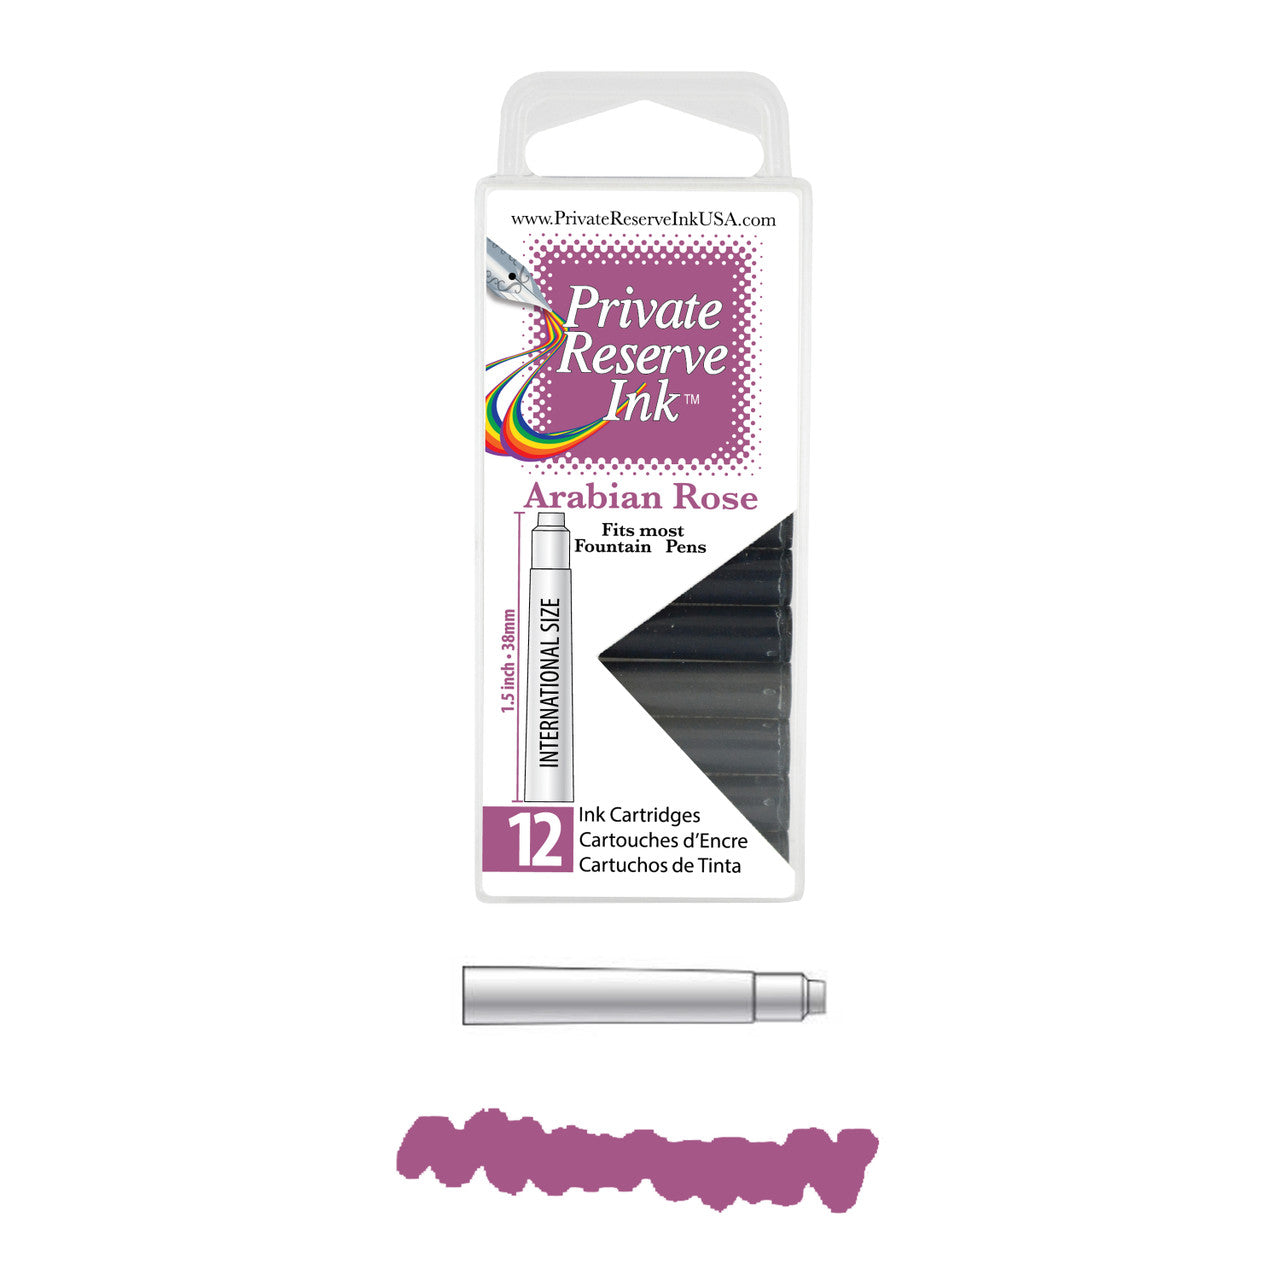 Private Reserve Ink 12pk Ink Cartridges for Short Standard International Size Fountain Pens